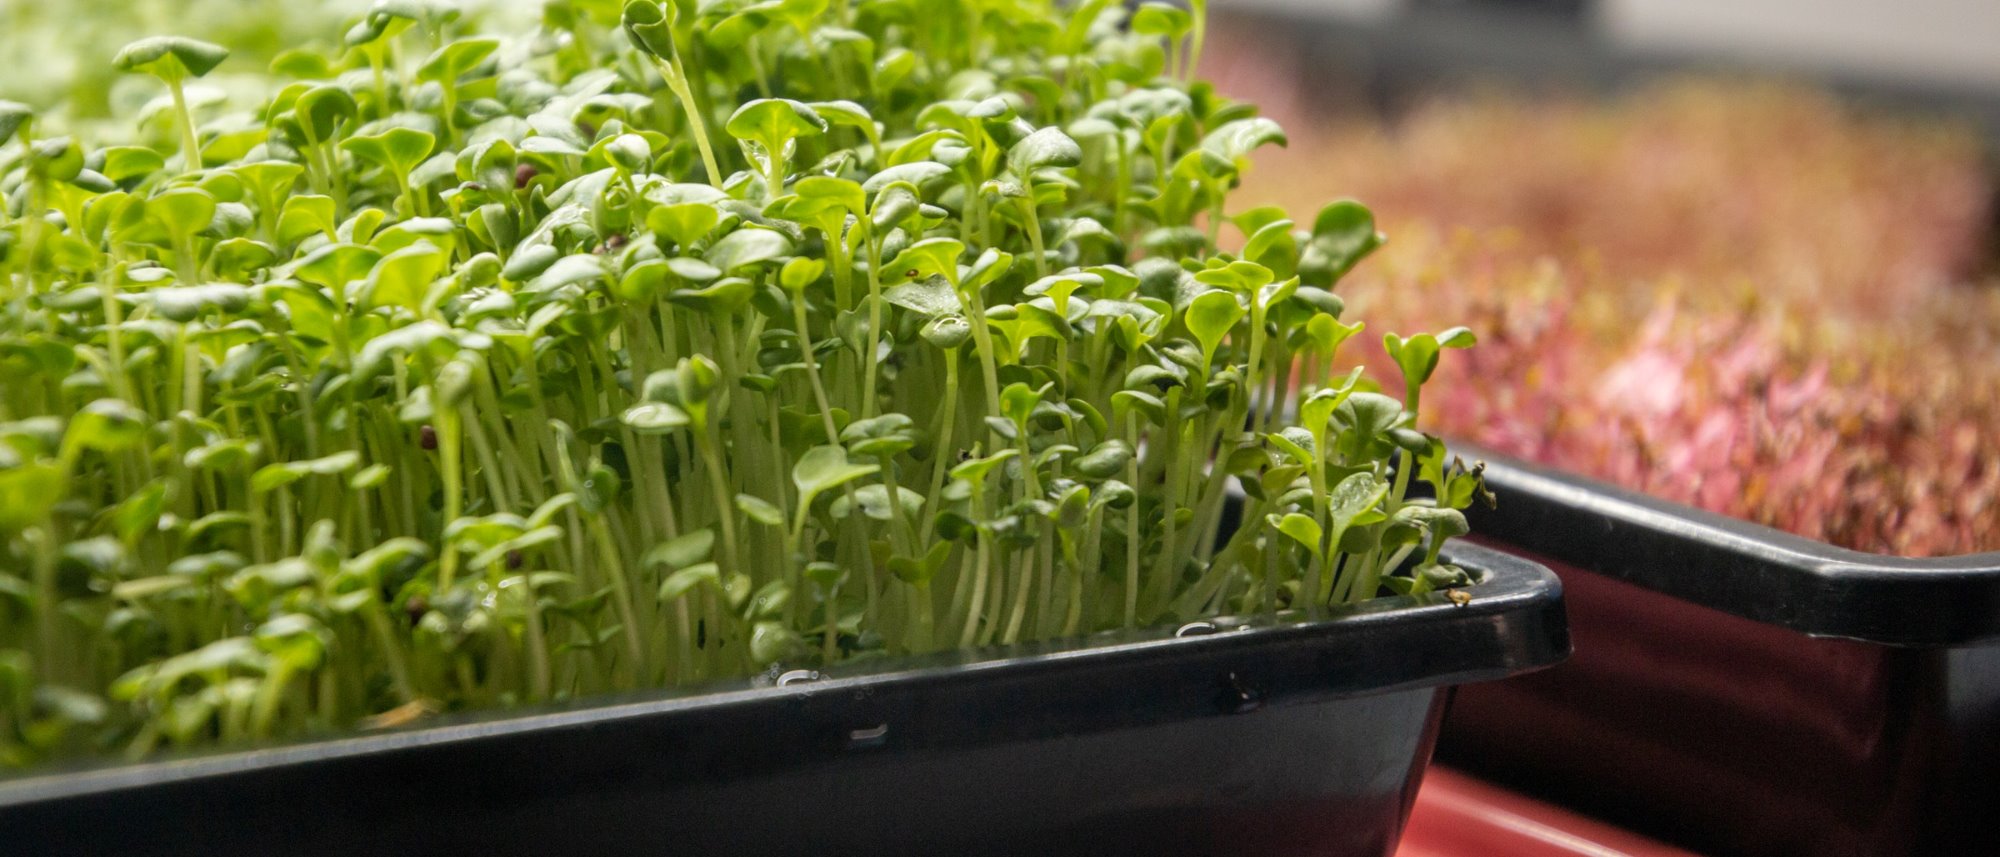 Growing your own microgreens is fast and easy